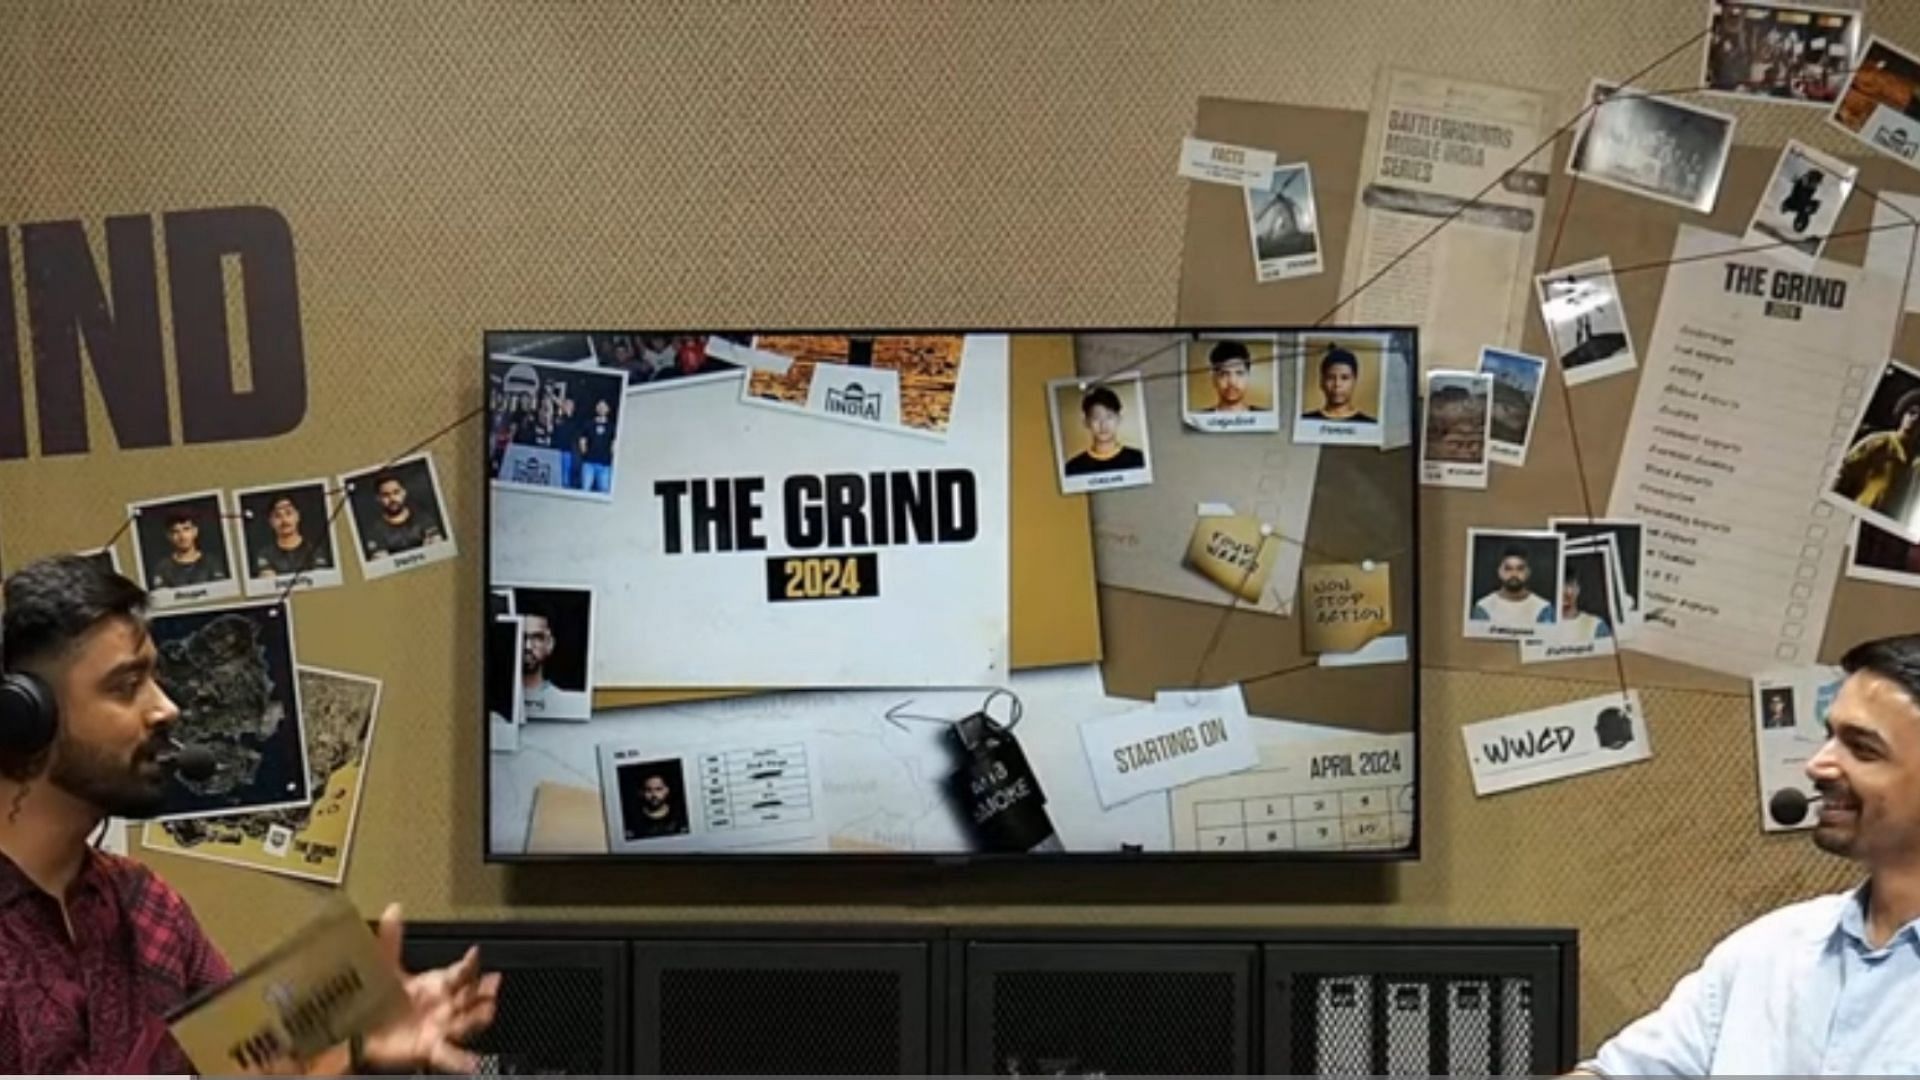 The Grind event wrapped up on April 28 (Image via BGMI)